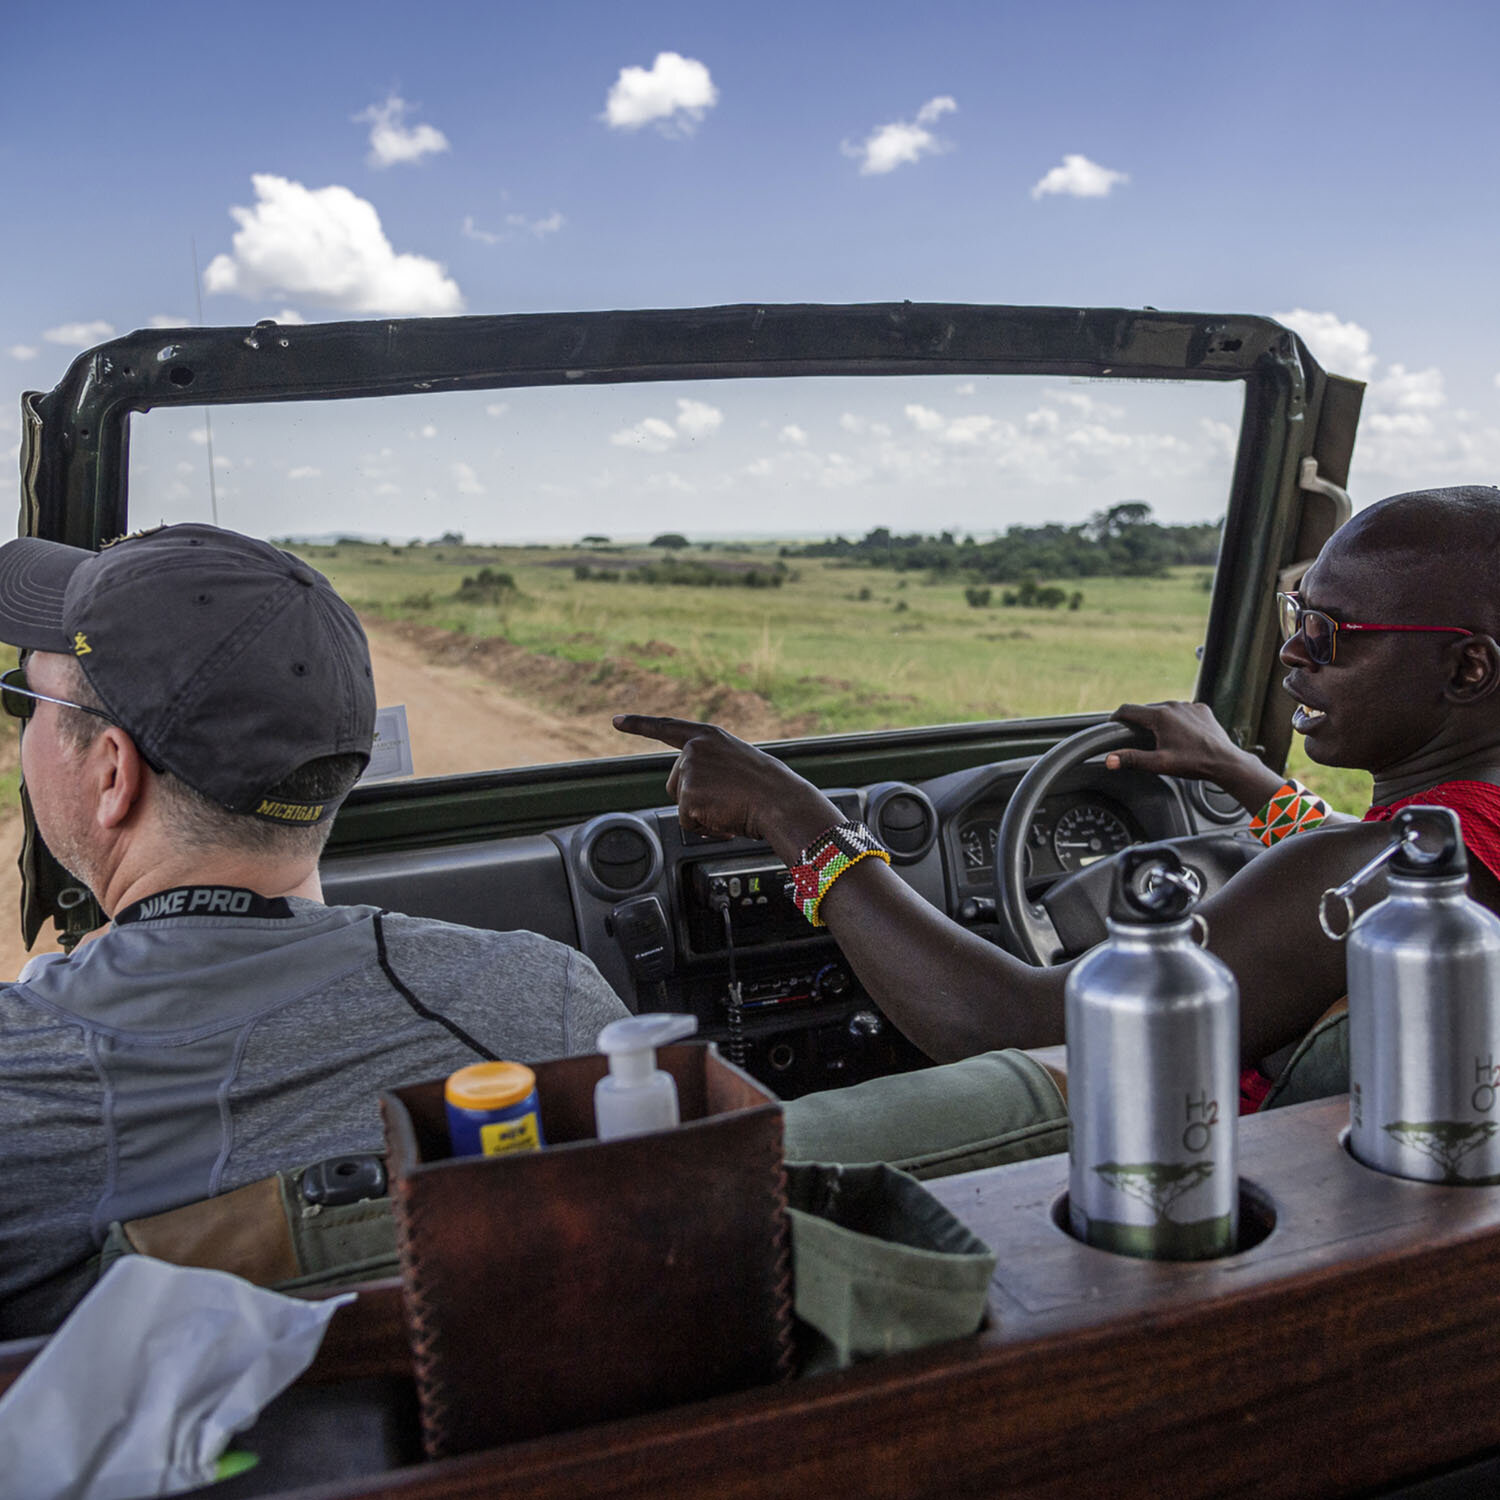 Tod Dalberg, ESC’s Director of Brand and Marketing, riding in a Jeep on a wildlife safari in the Masai Mara game reserve in Narok County, Kenya